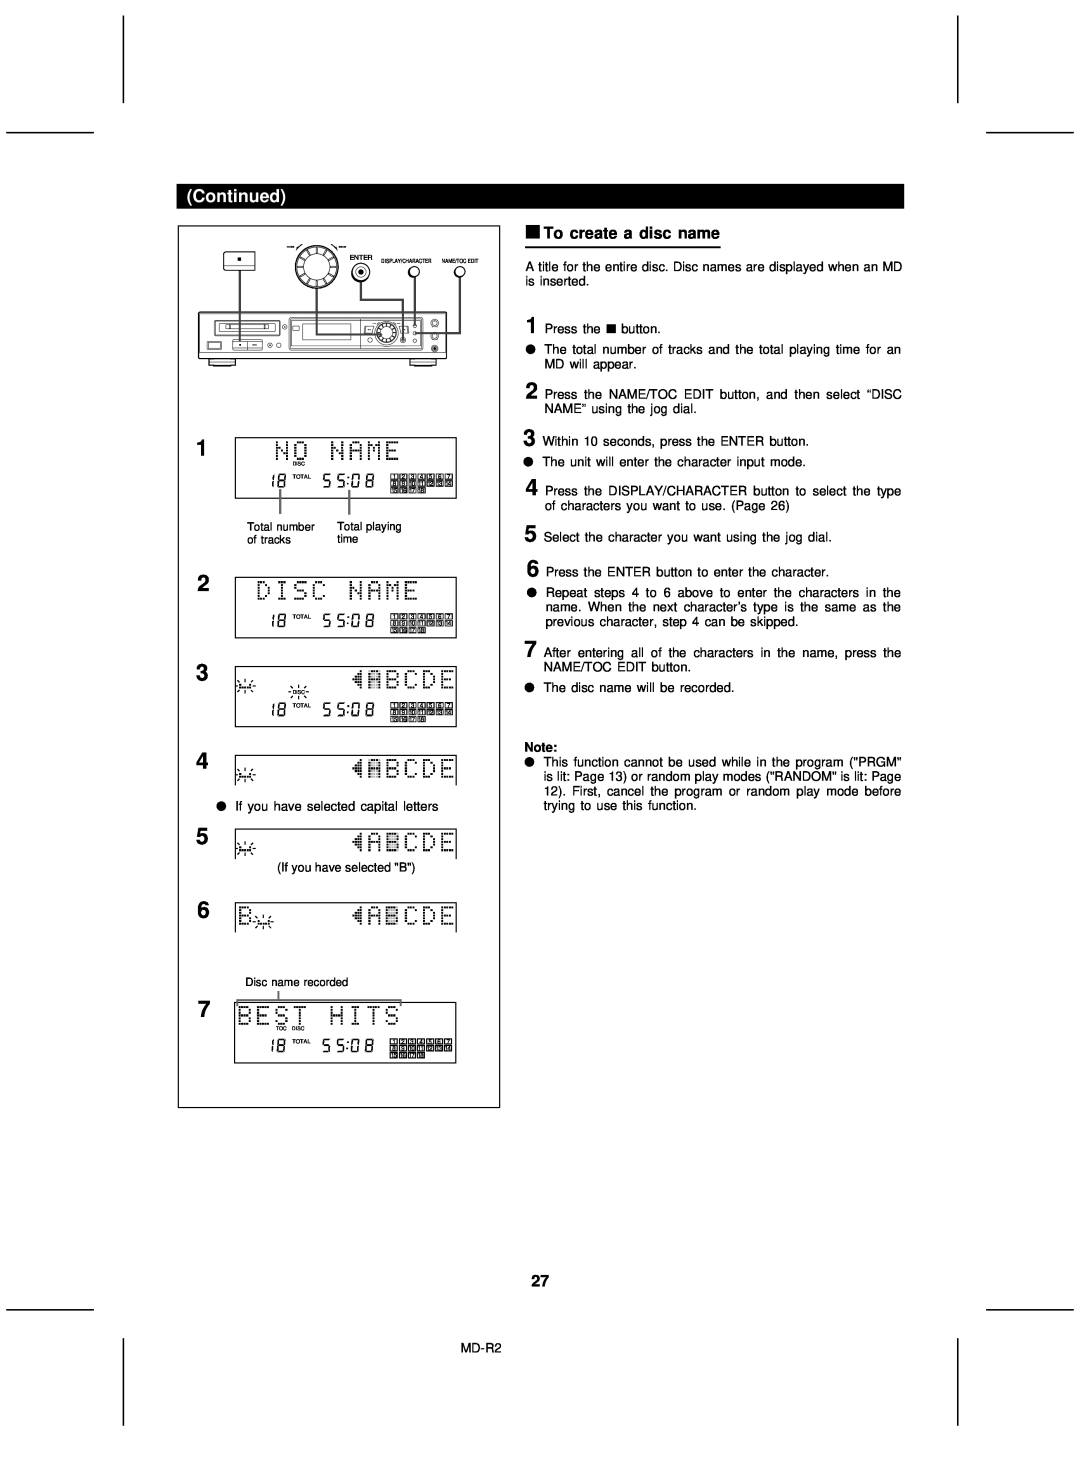 Kenwood MD-R2 operation manual To create a disc name, Continued 